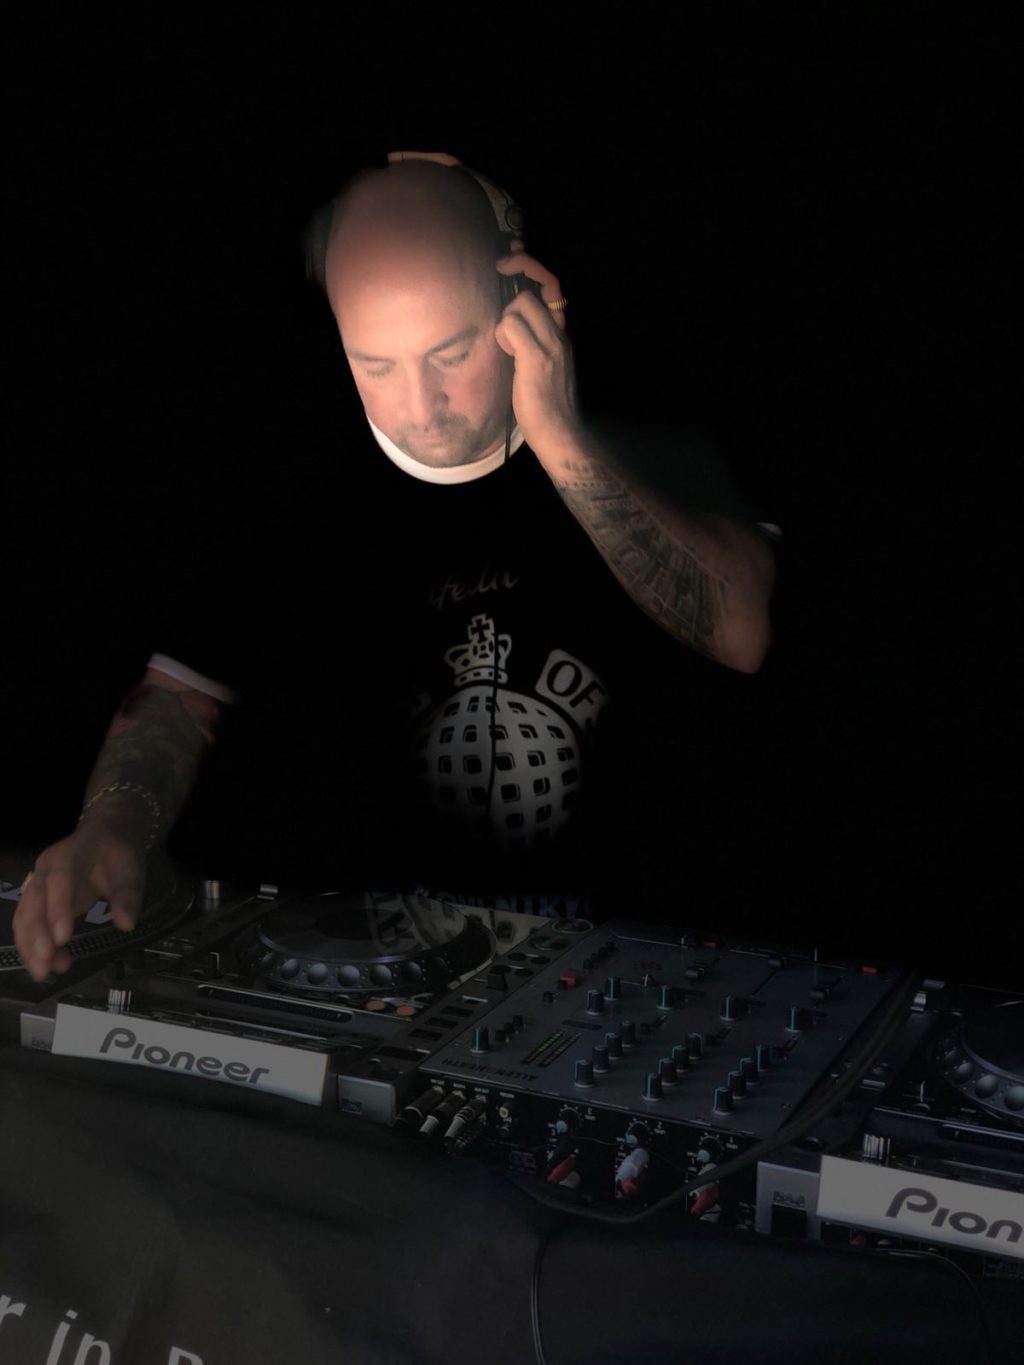 A weekly radio show is hosted by DJ Skinnfella.